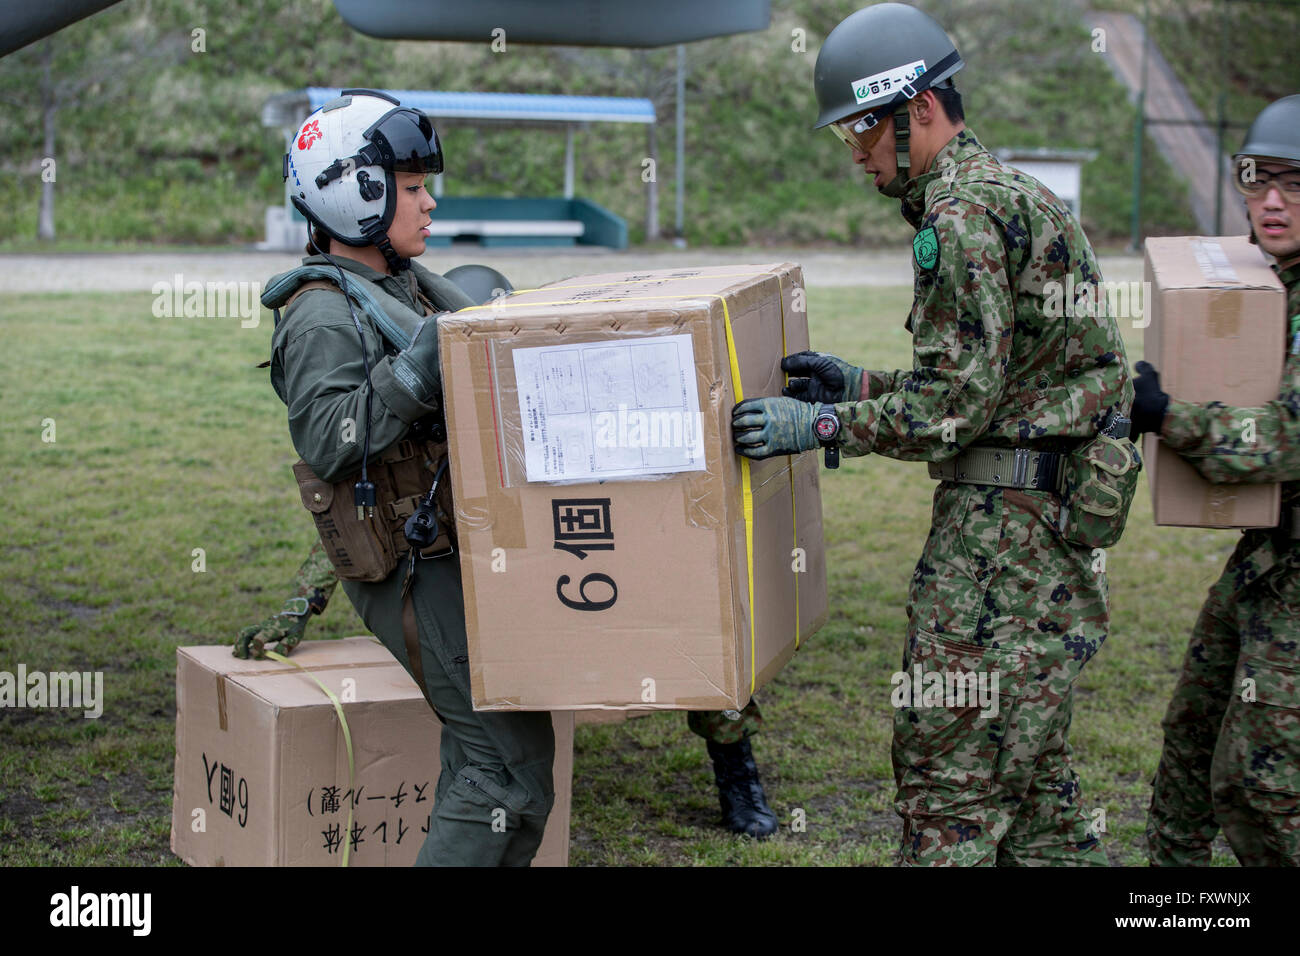 U.S Marines assist Japanese Self-Defense soldiers with unloading humanitarian aid for those affected by recent earthquakes in Kumamoto April 18, 2016 Takayubaru, Japan. The U.S joined thousands of Japanese troops to help victims of two massive earthquakes that struck the Kyushu region. Stock Photo